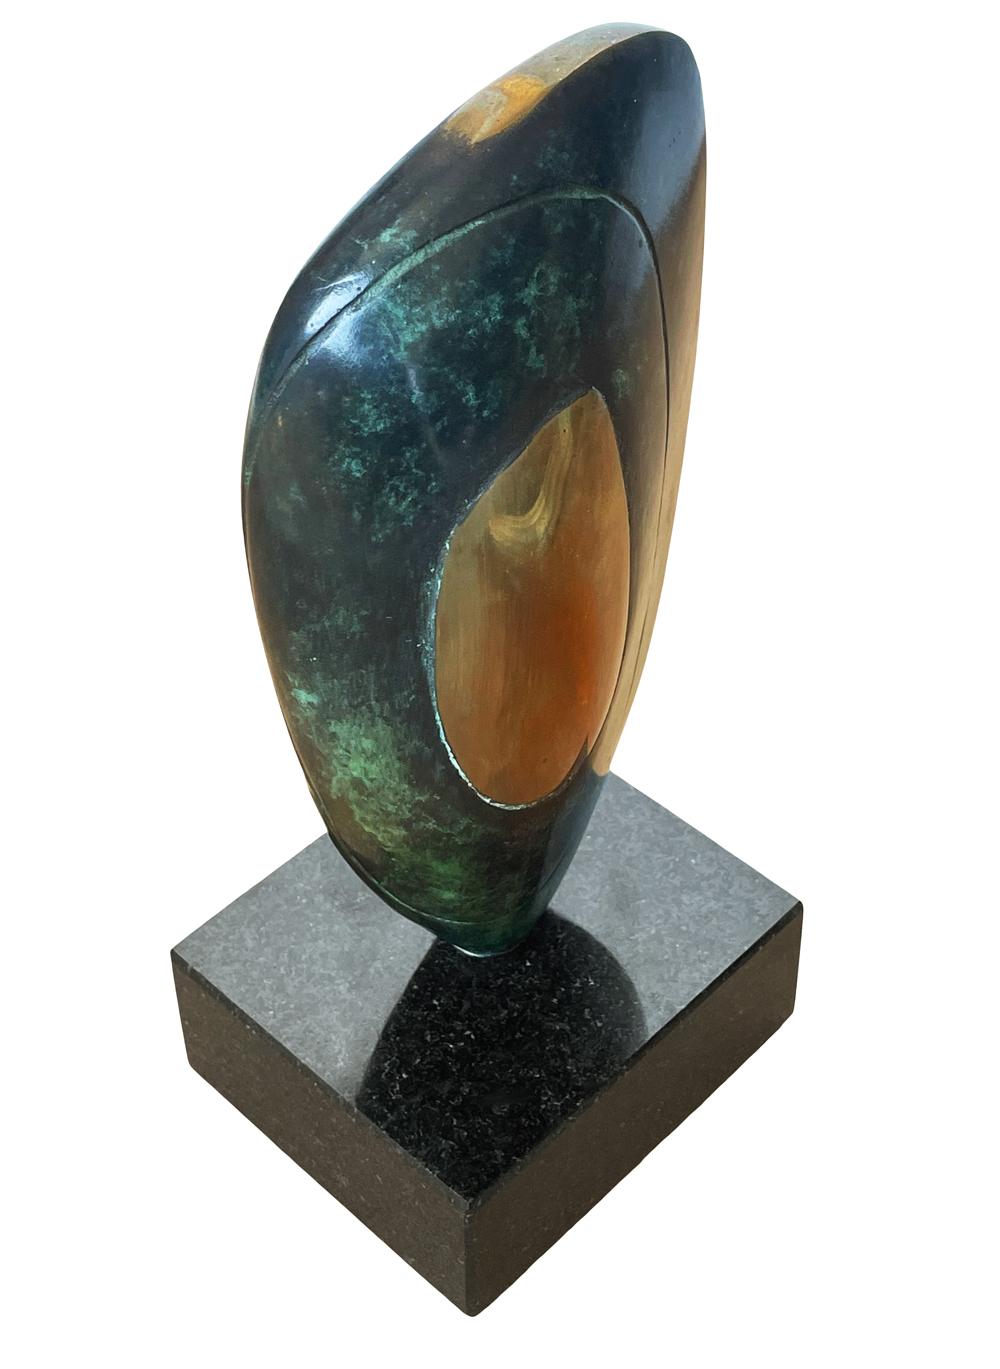 Heavy solid patinated bronze standing form by Dennis Westwood. Numbered 14 of 20.